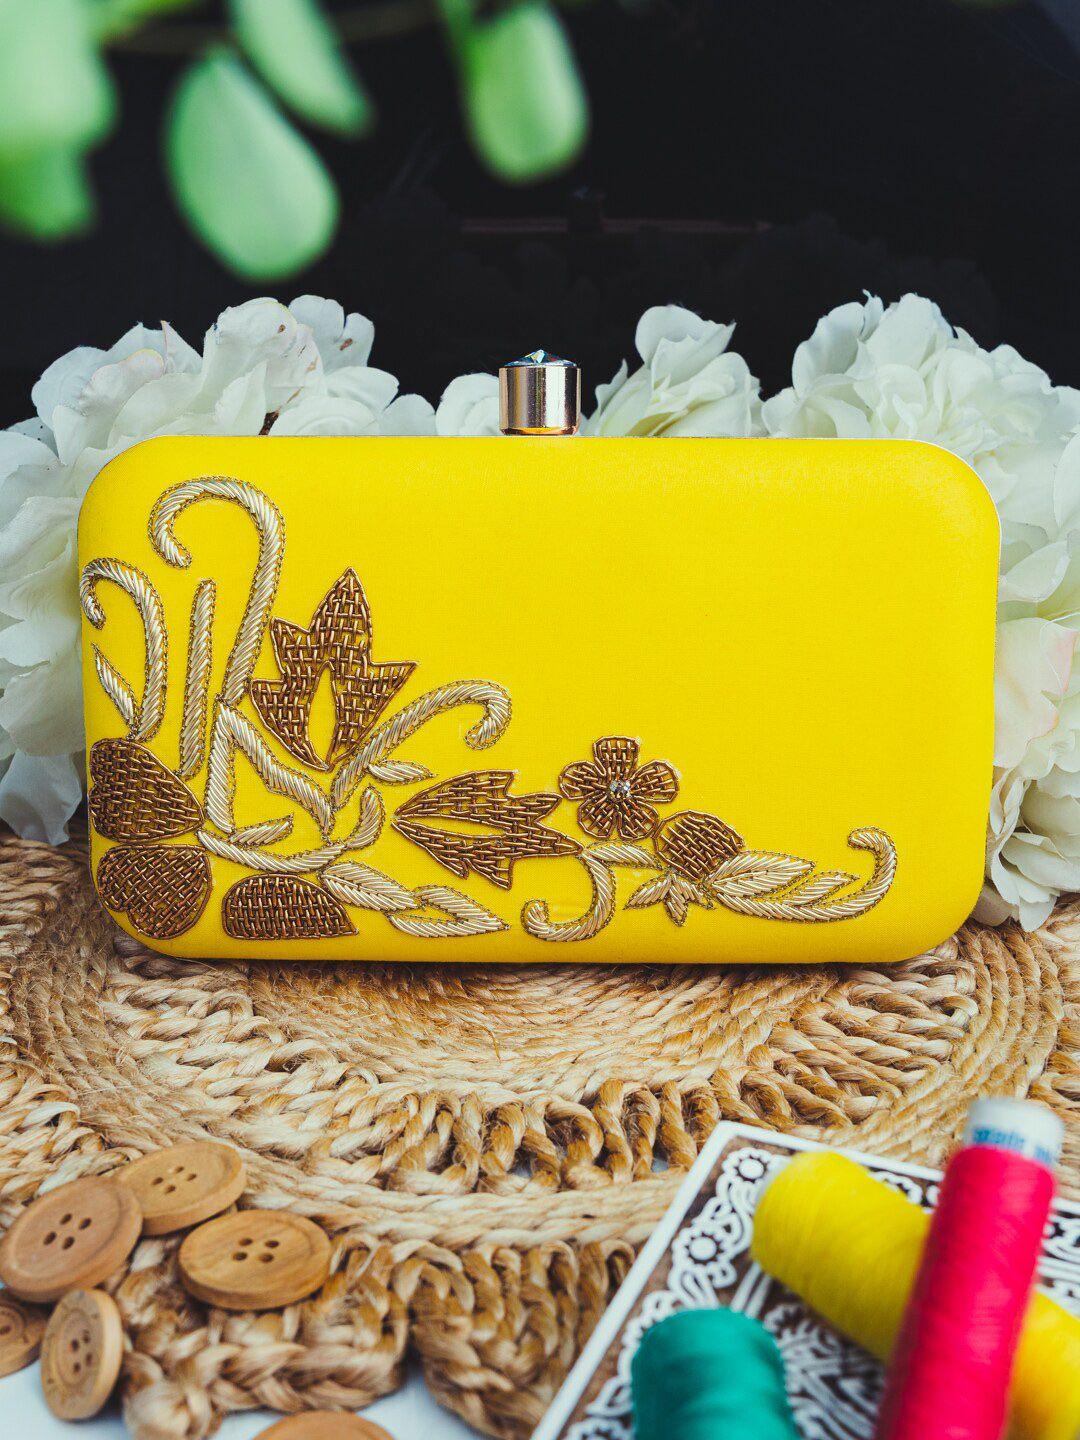 sangria embroidered clutch